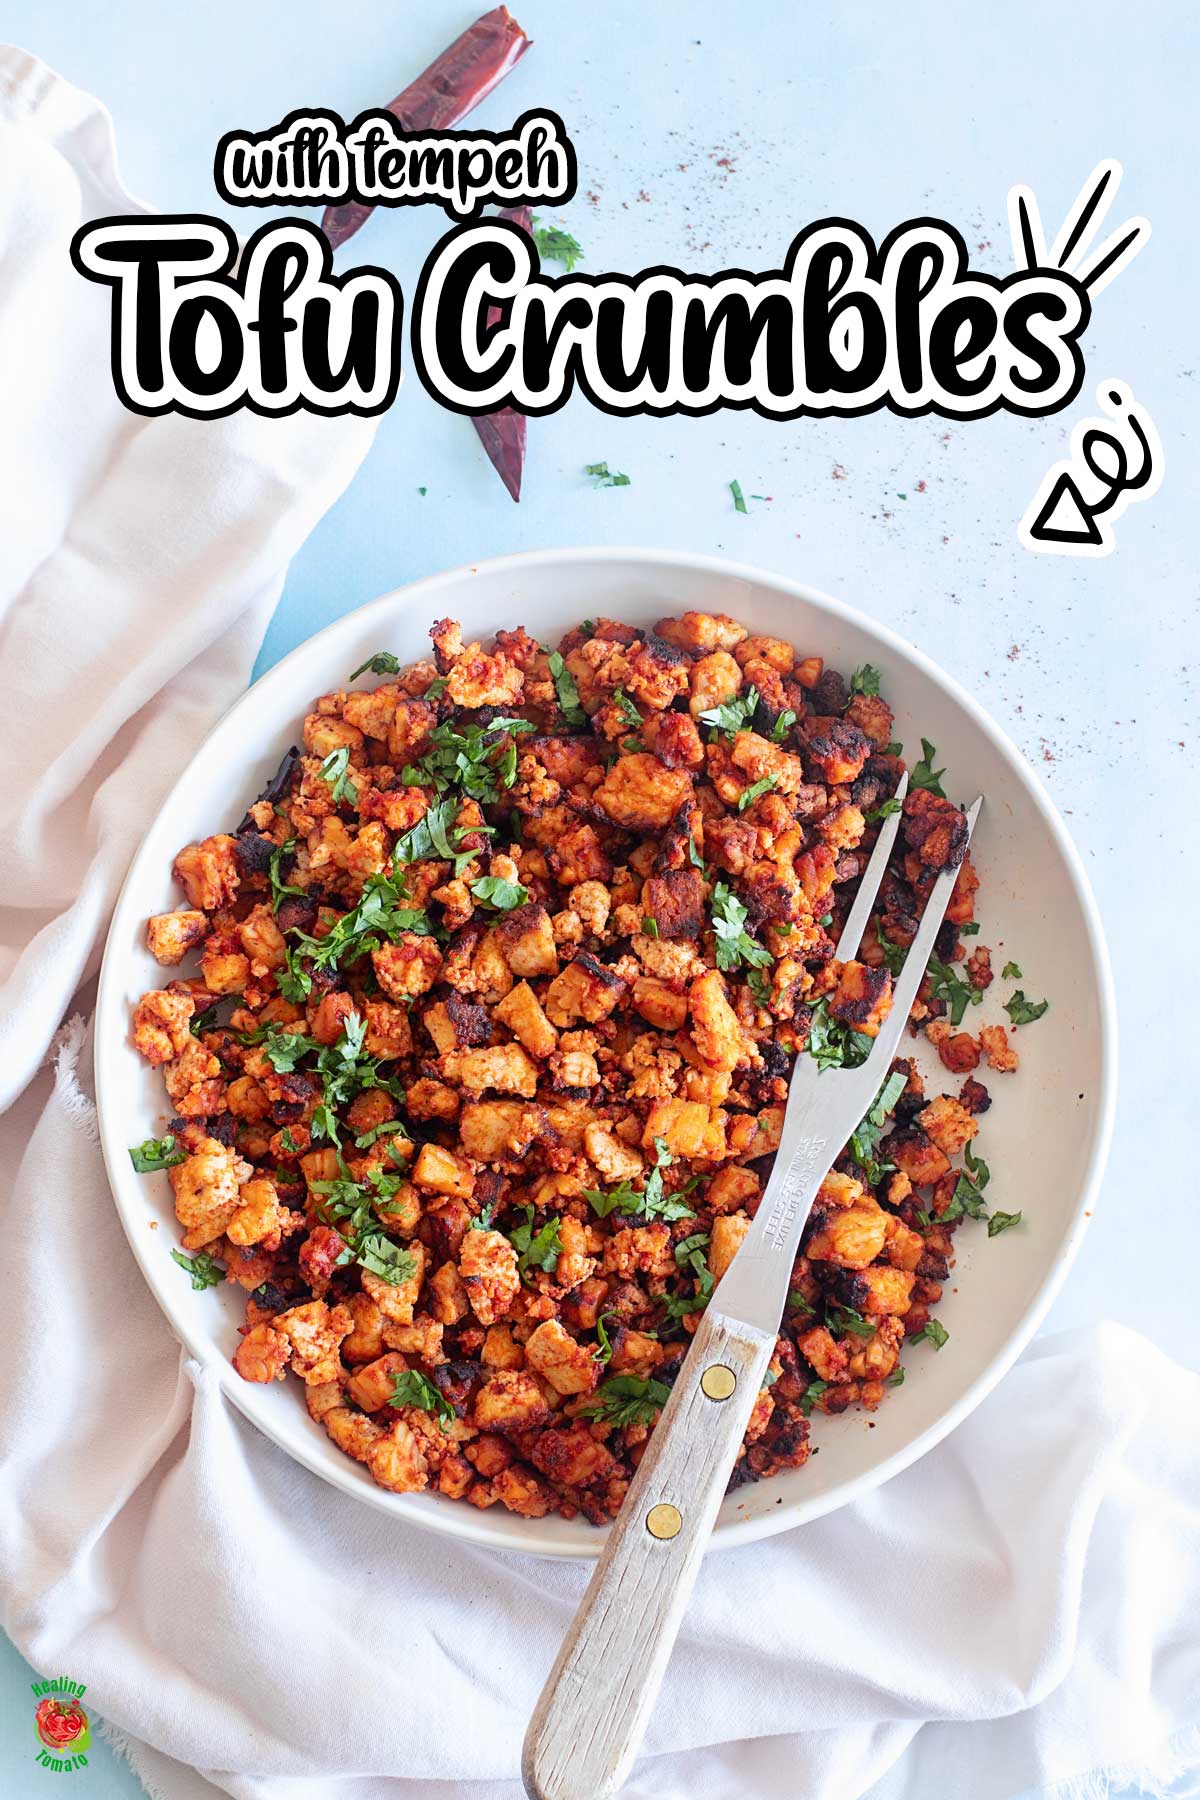 Top and closeup view of a white bowl filled with the tofu tempeh crumbles and a grilling fork on the side.